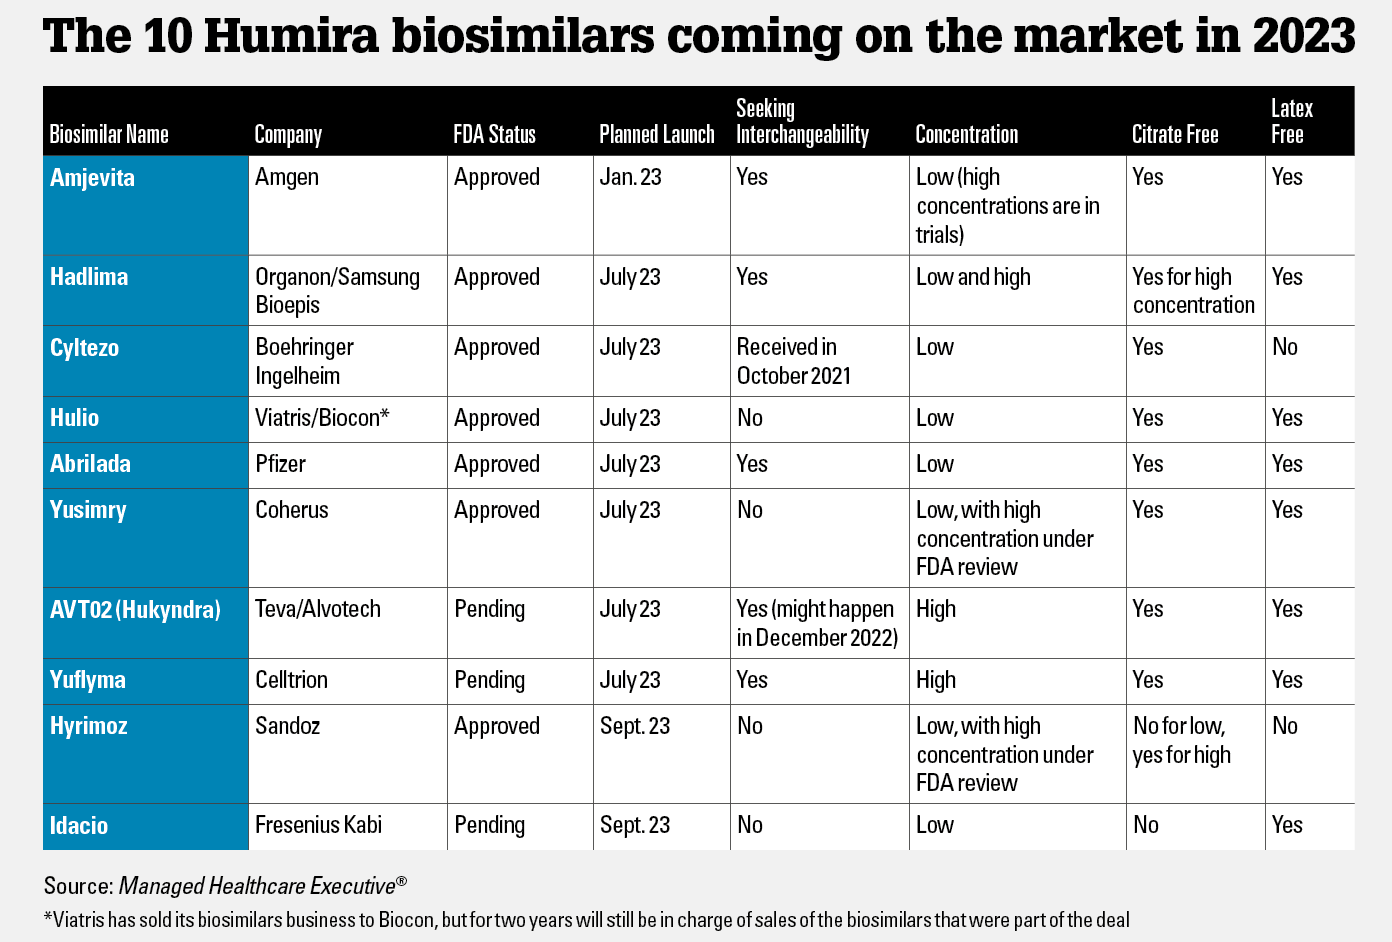 Biosimilars are now gaining traction faster — an average of 75% market share after three years, according to Amgen — so it is possible Humira’s sales could bottom out quickly.